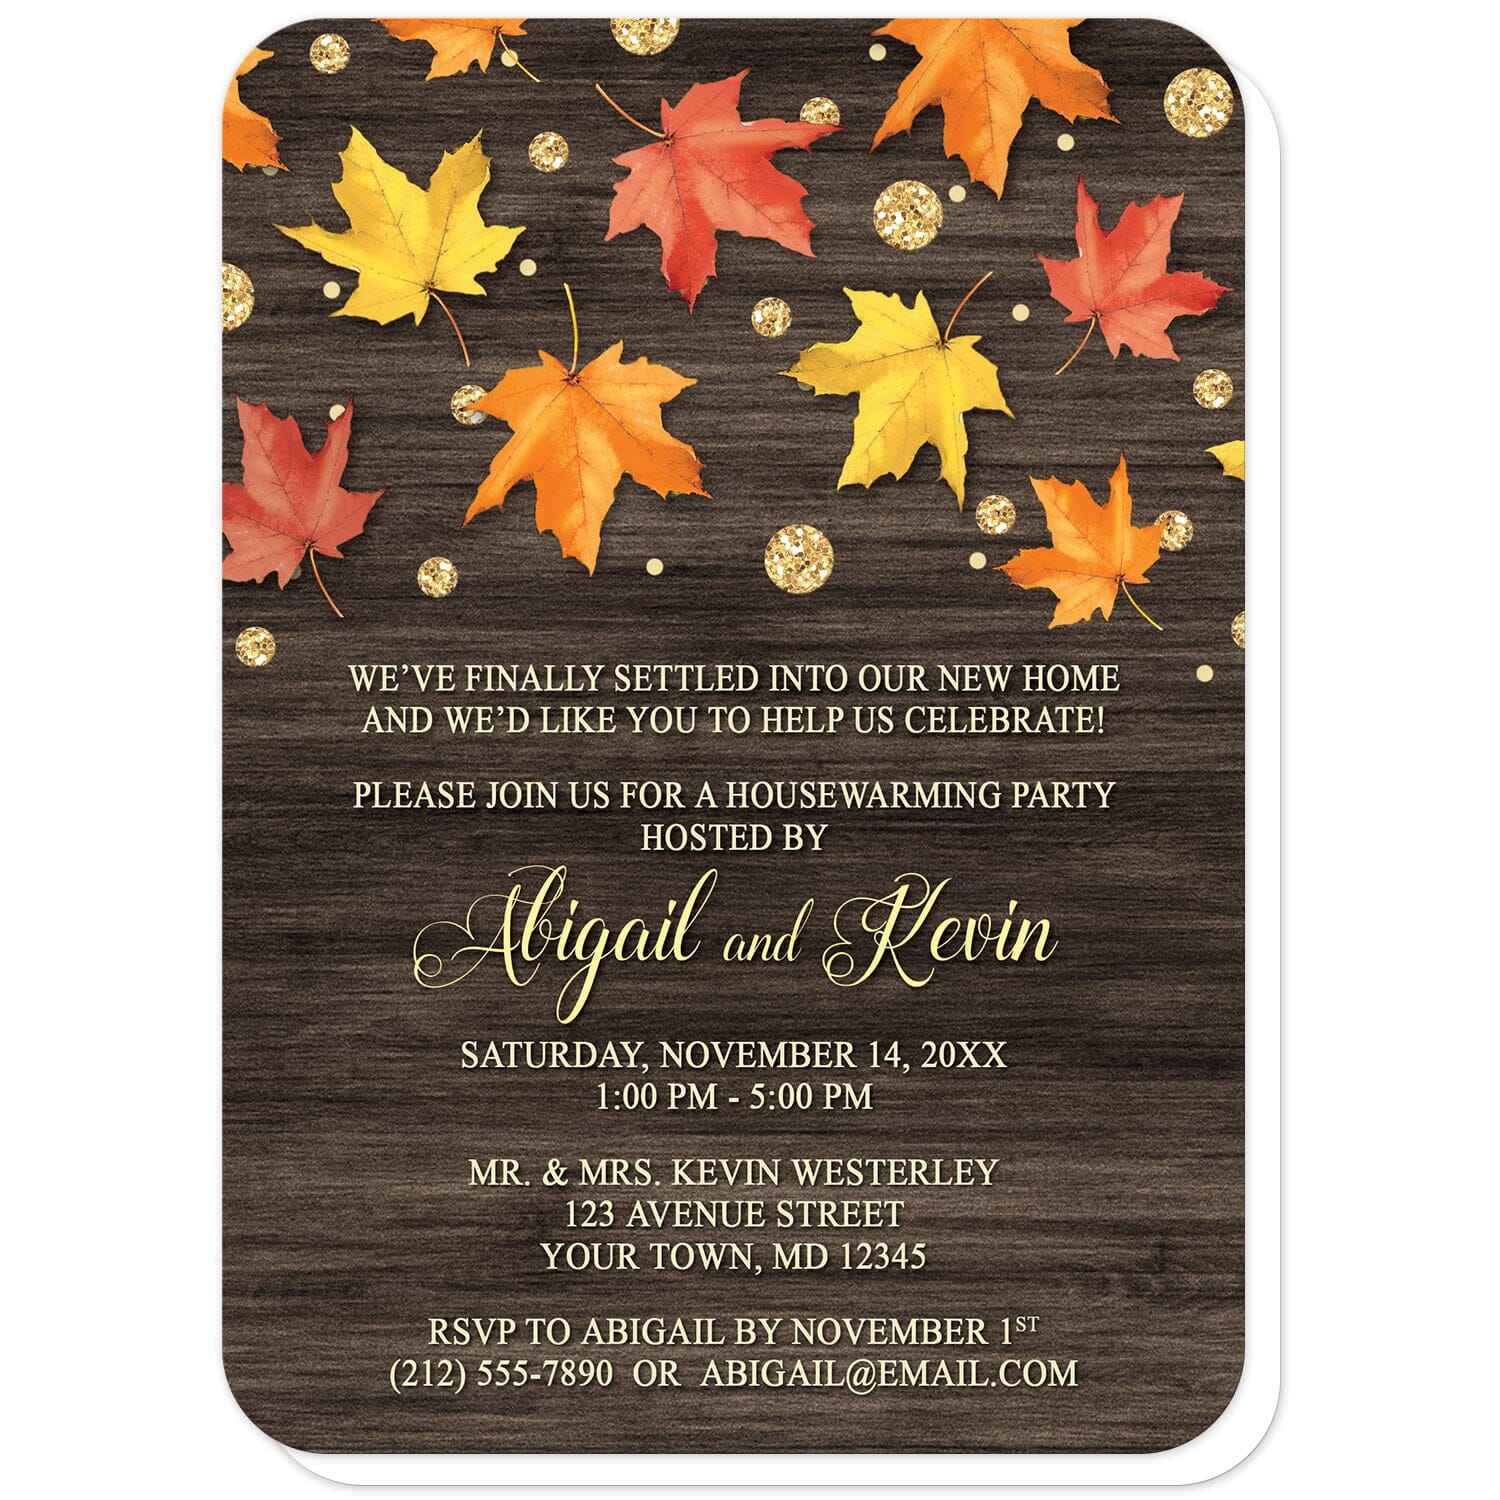 Falling Leaves with Gold Autumn Housewarming Invitations (with rounded corners) at Artistically Invited. Beautiful rustic falling leaves with gold autumn housewarming invitations with red, orange, and yellow leaves scattered and falling along the top, coupled with gold-colored glitter-illustrated circles, over a dark brown wood background. Your personalized housewarming celebration details are custom printed in yellow and light gold over the wood background below the leaves. 